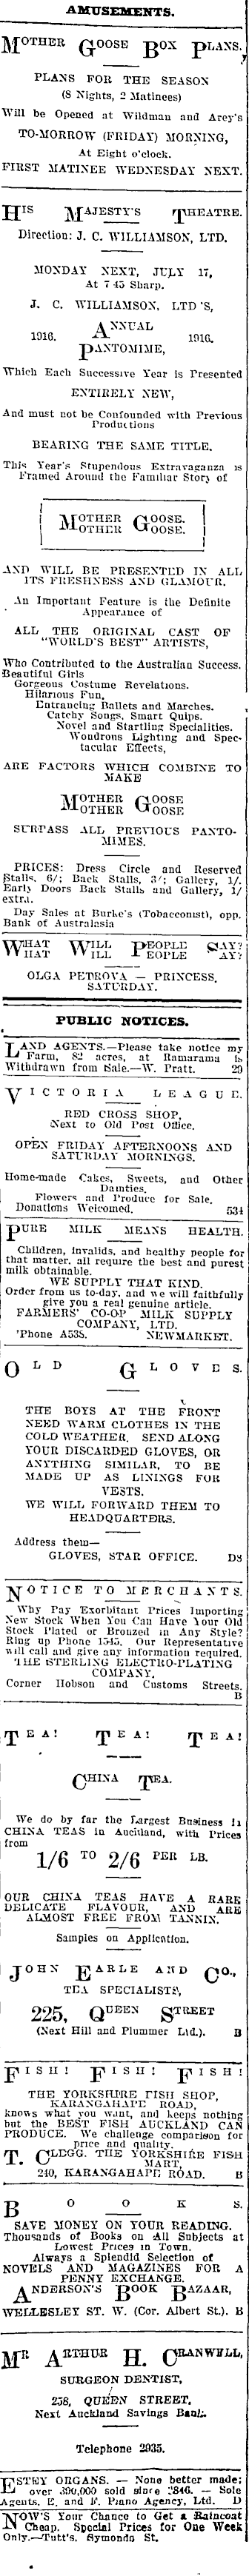 Papers Past Newspapers Auckland Star 13 July 1916 Page 12 Advertisements Column 2